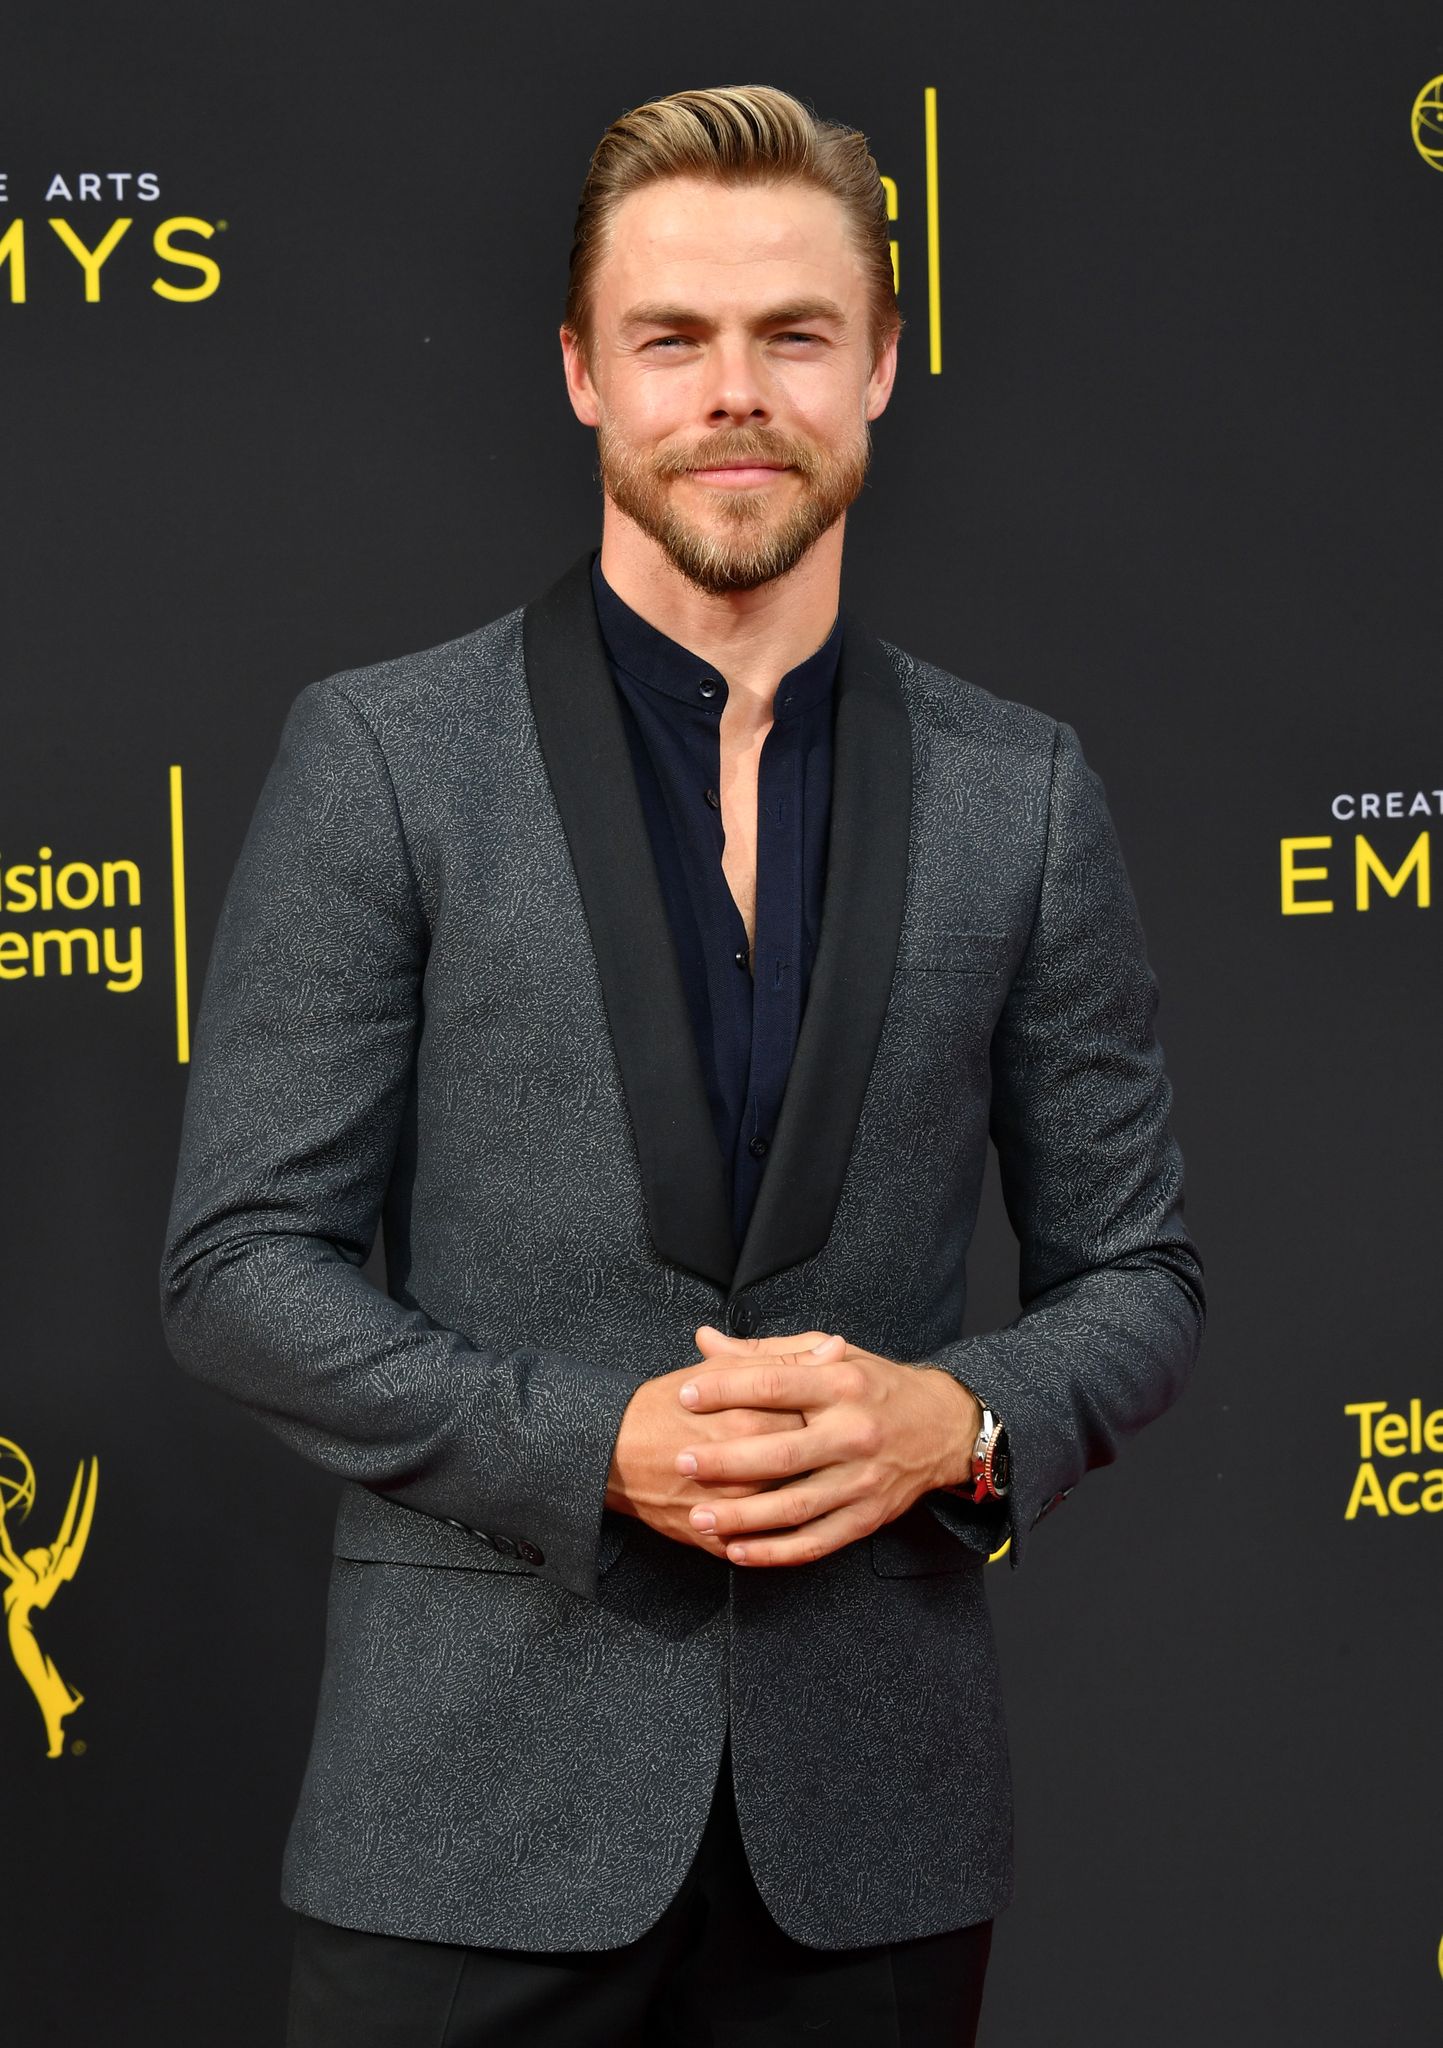 Derek Hough on September 14, 2019 in Los Angeles, California. | Photo : Getty Images